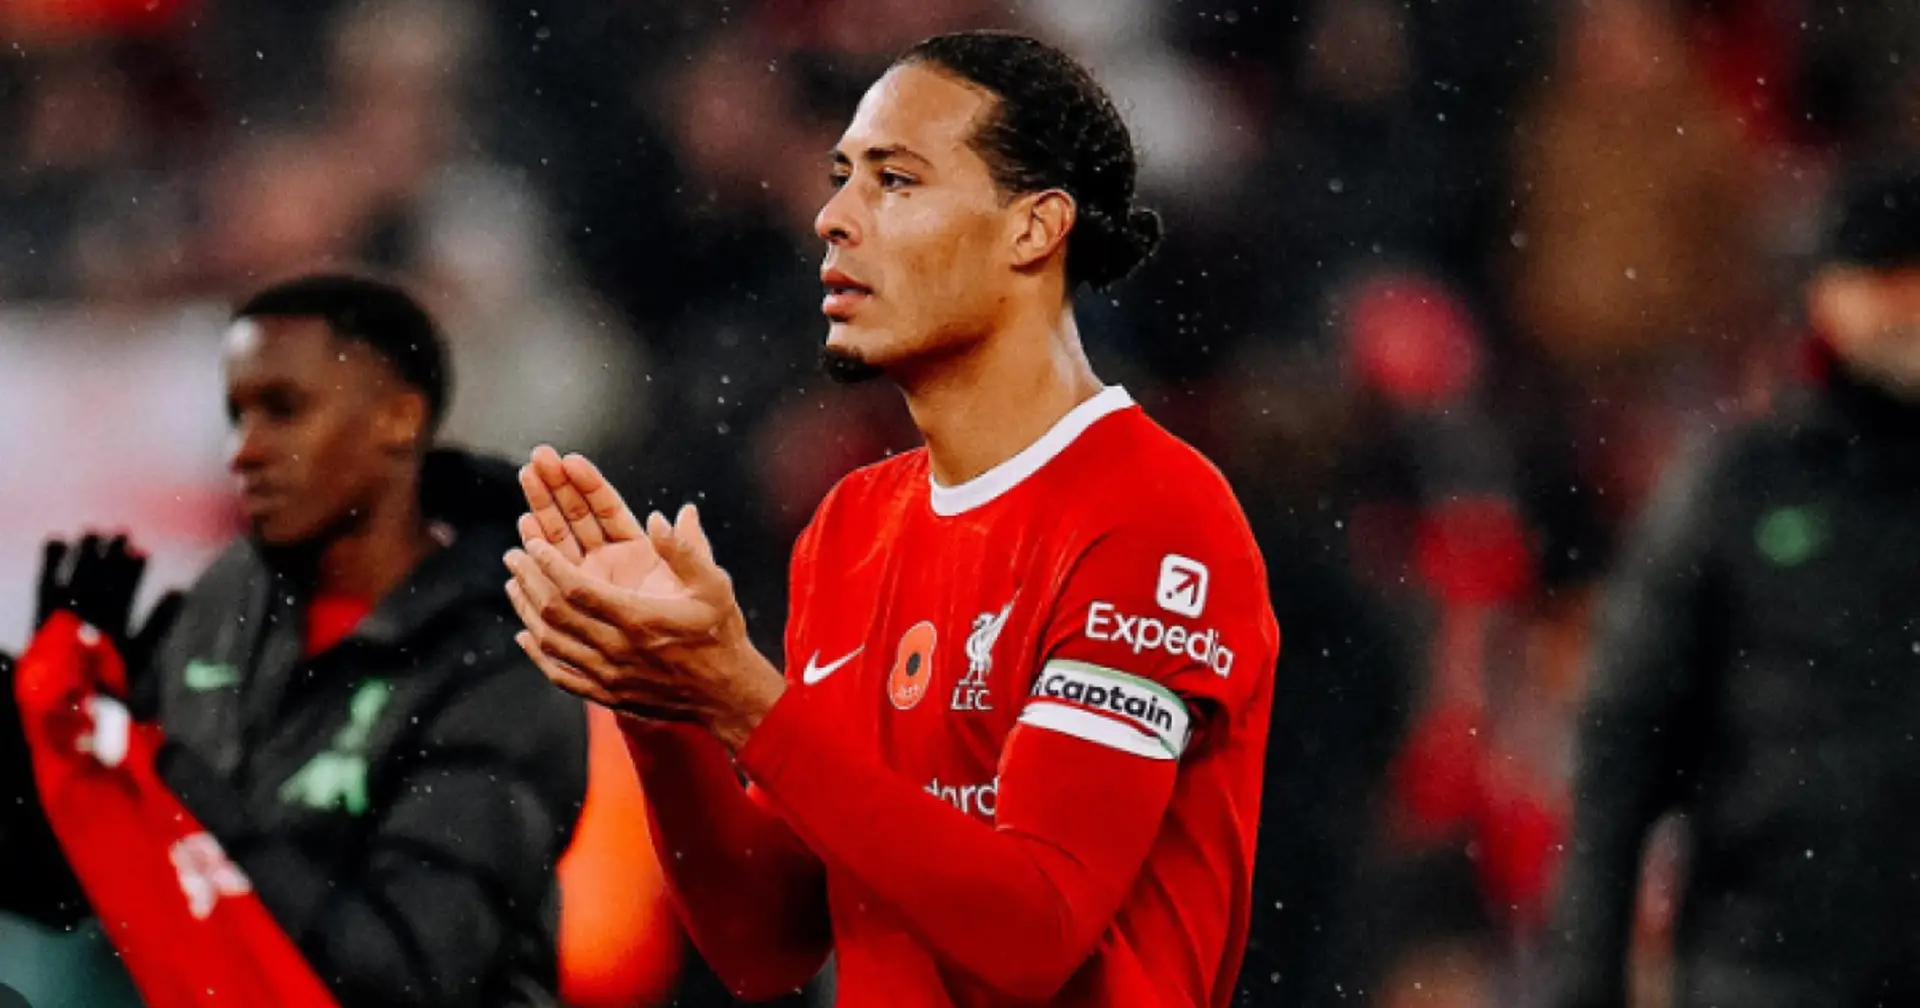 Van Dijk says he attended Liverpool U9s & U10s matches: 'I'm a captain of the entire club'